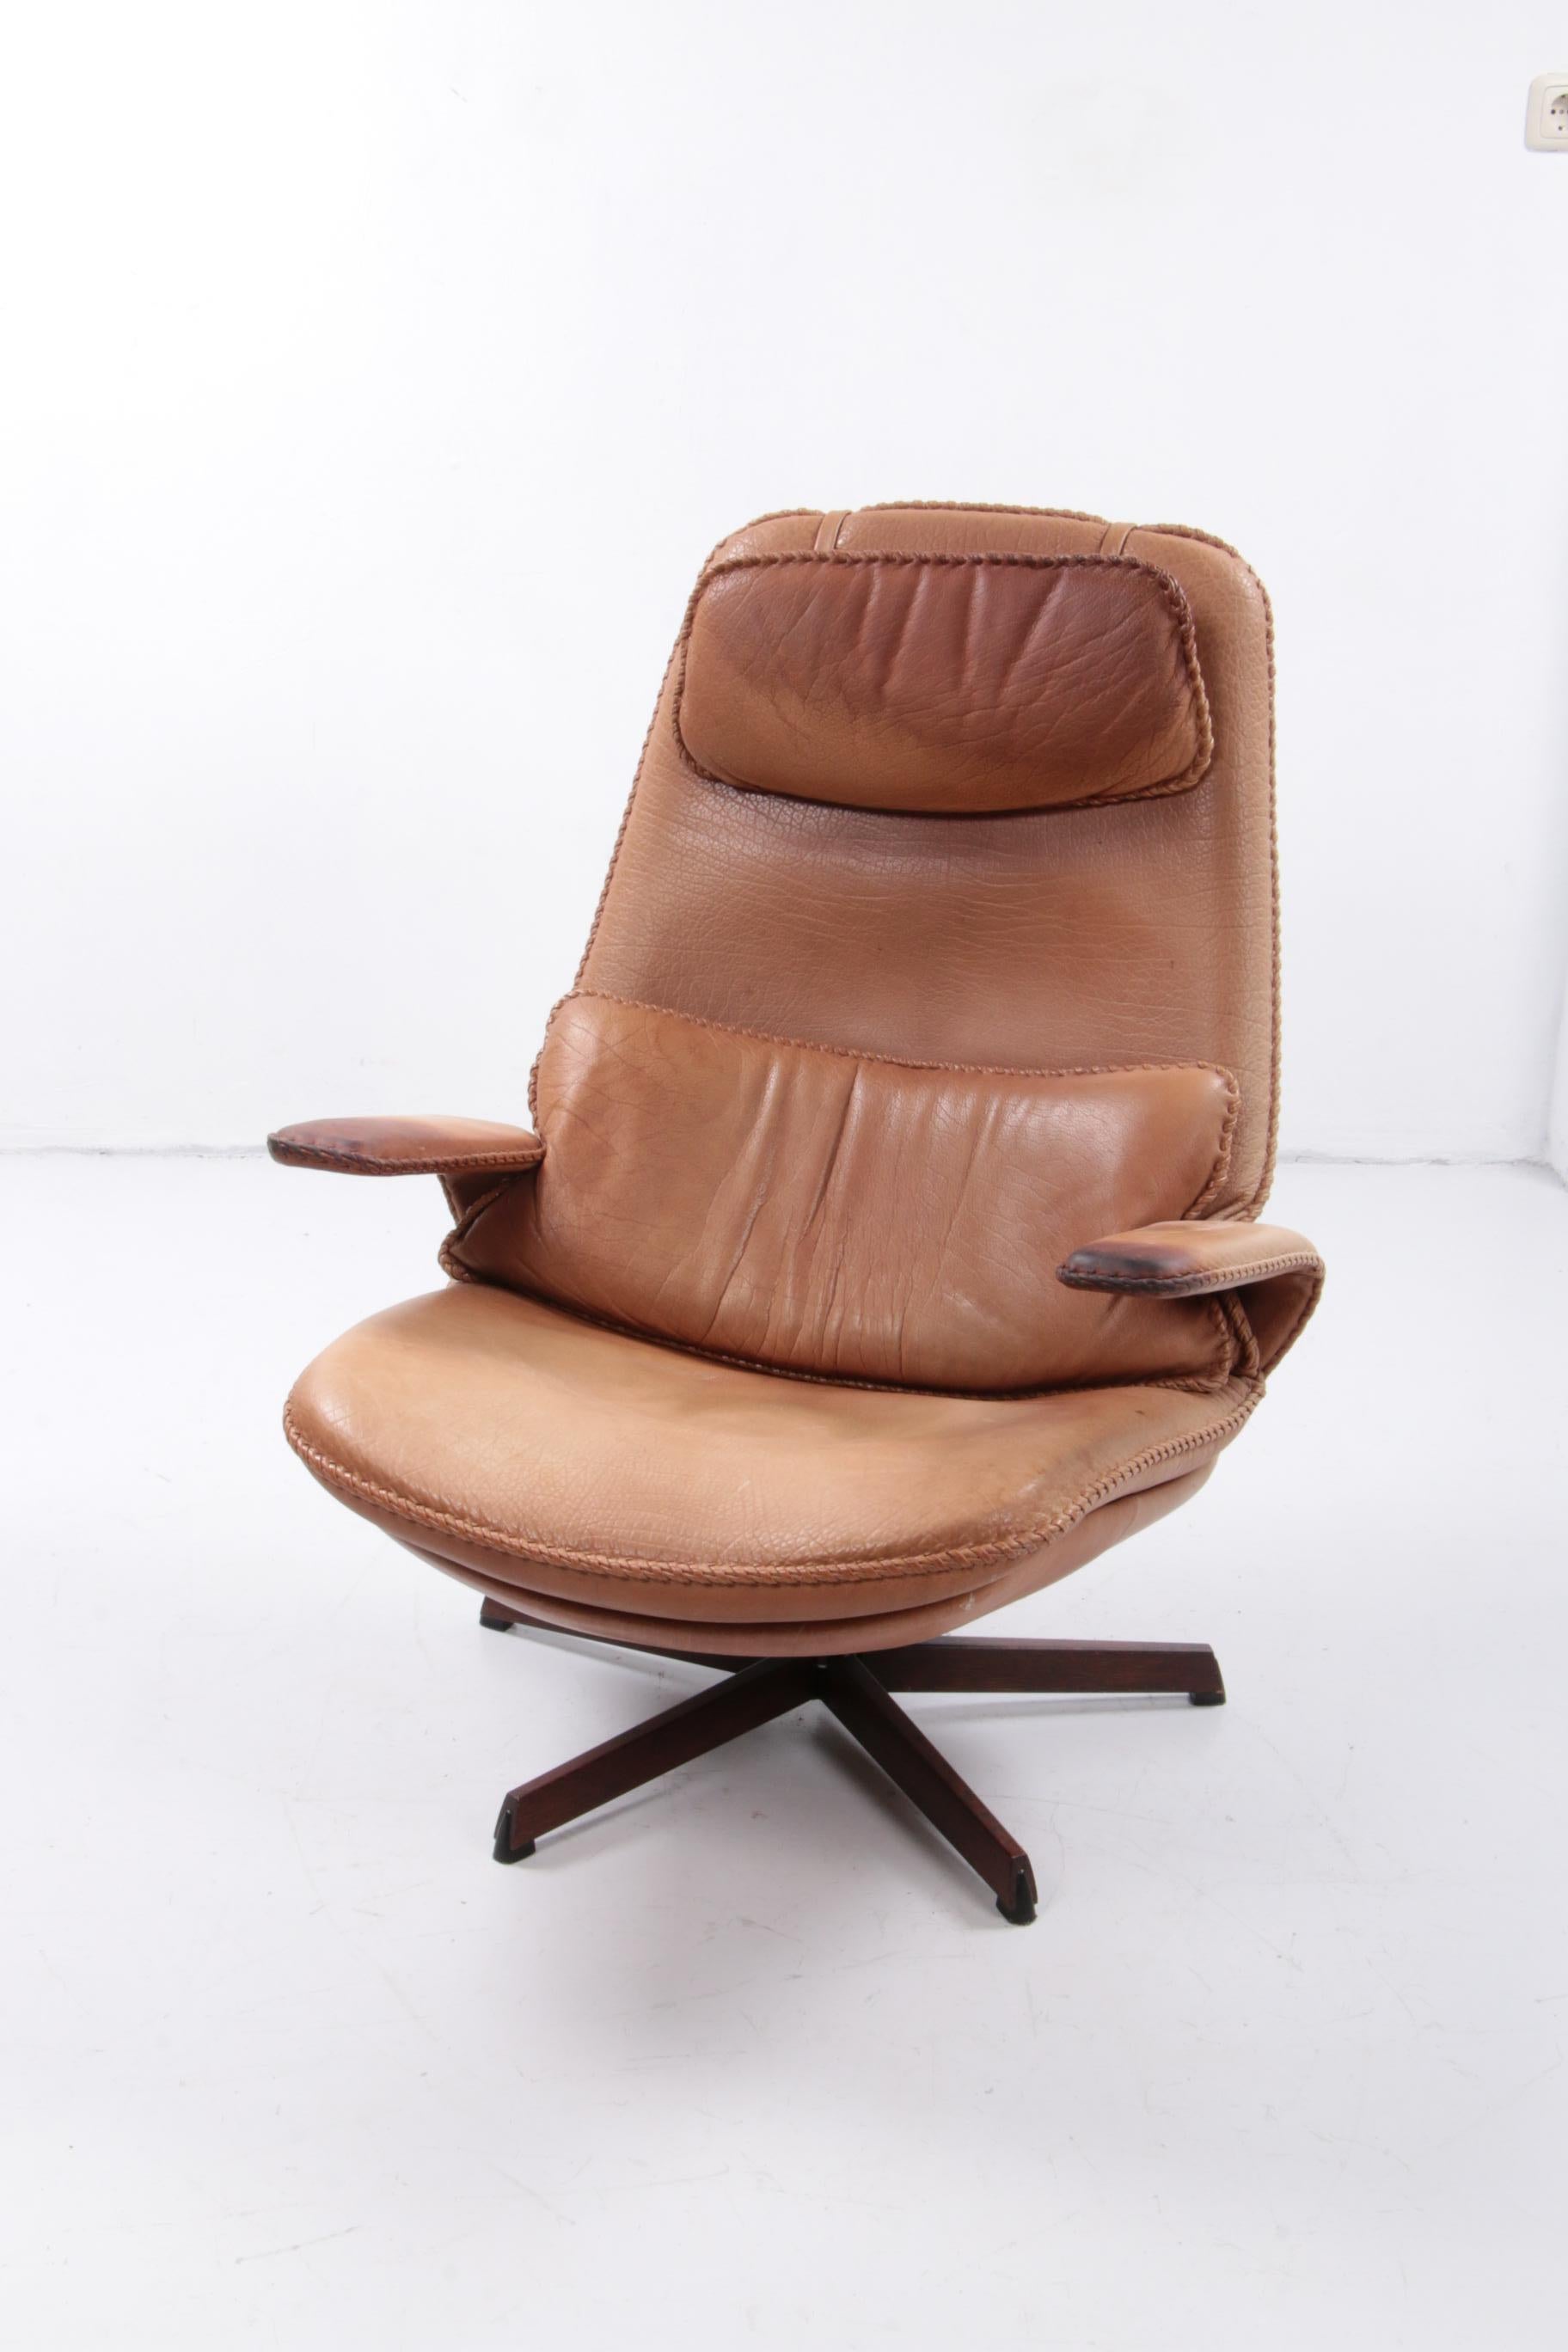 Mid-20th Century Danish Buffalo Leather Adjustable Armchair & Ottoman Set by M&S Mobler, 1960s For Sale